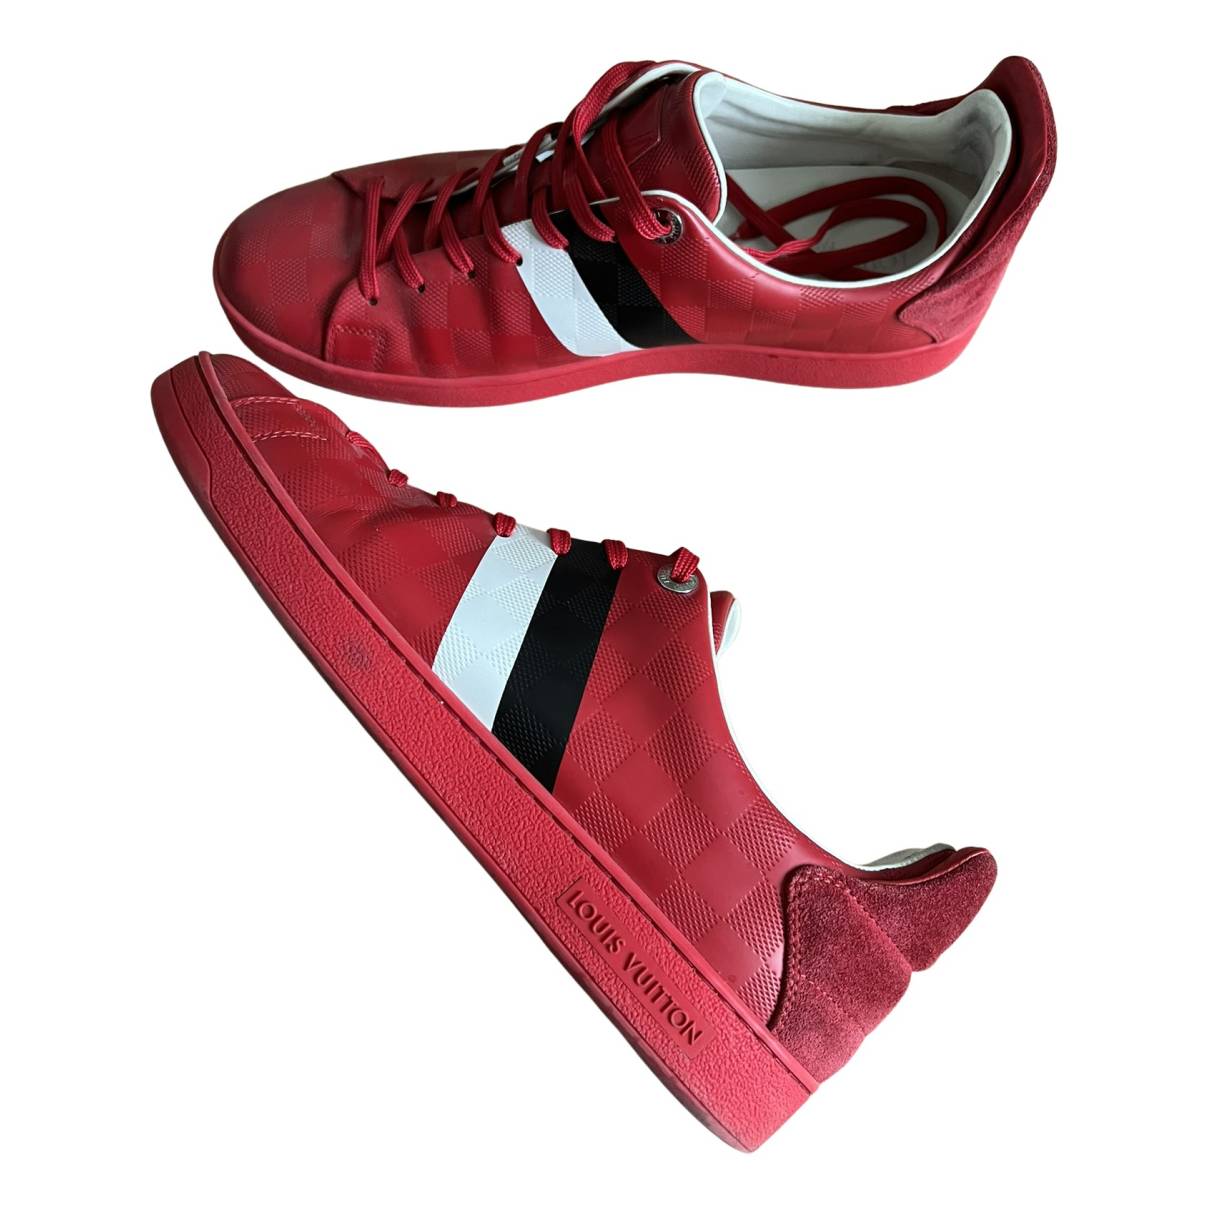 Lv trainer leather high trainers Louis Vuitton Red size 8 UK in Leather -  35993634